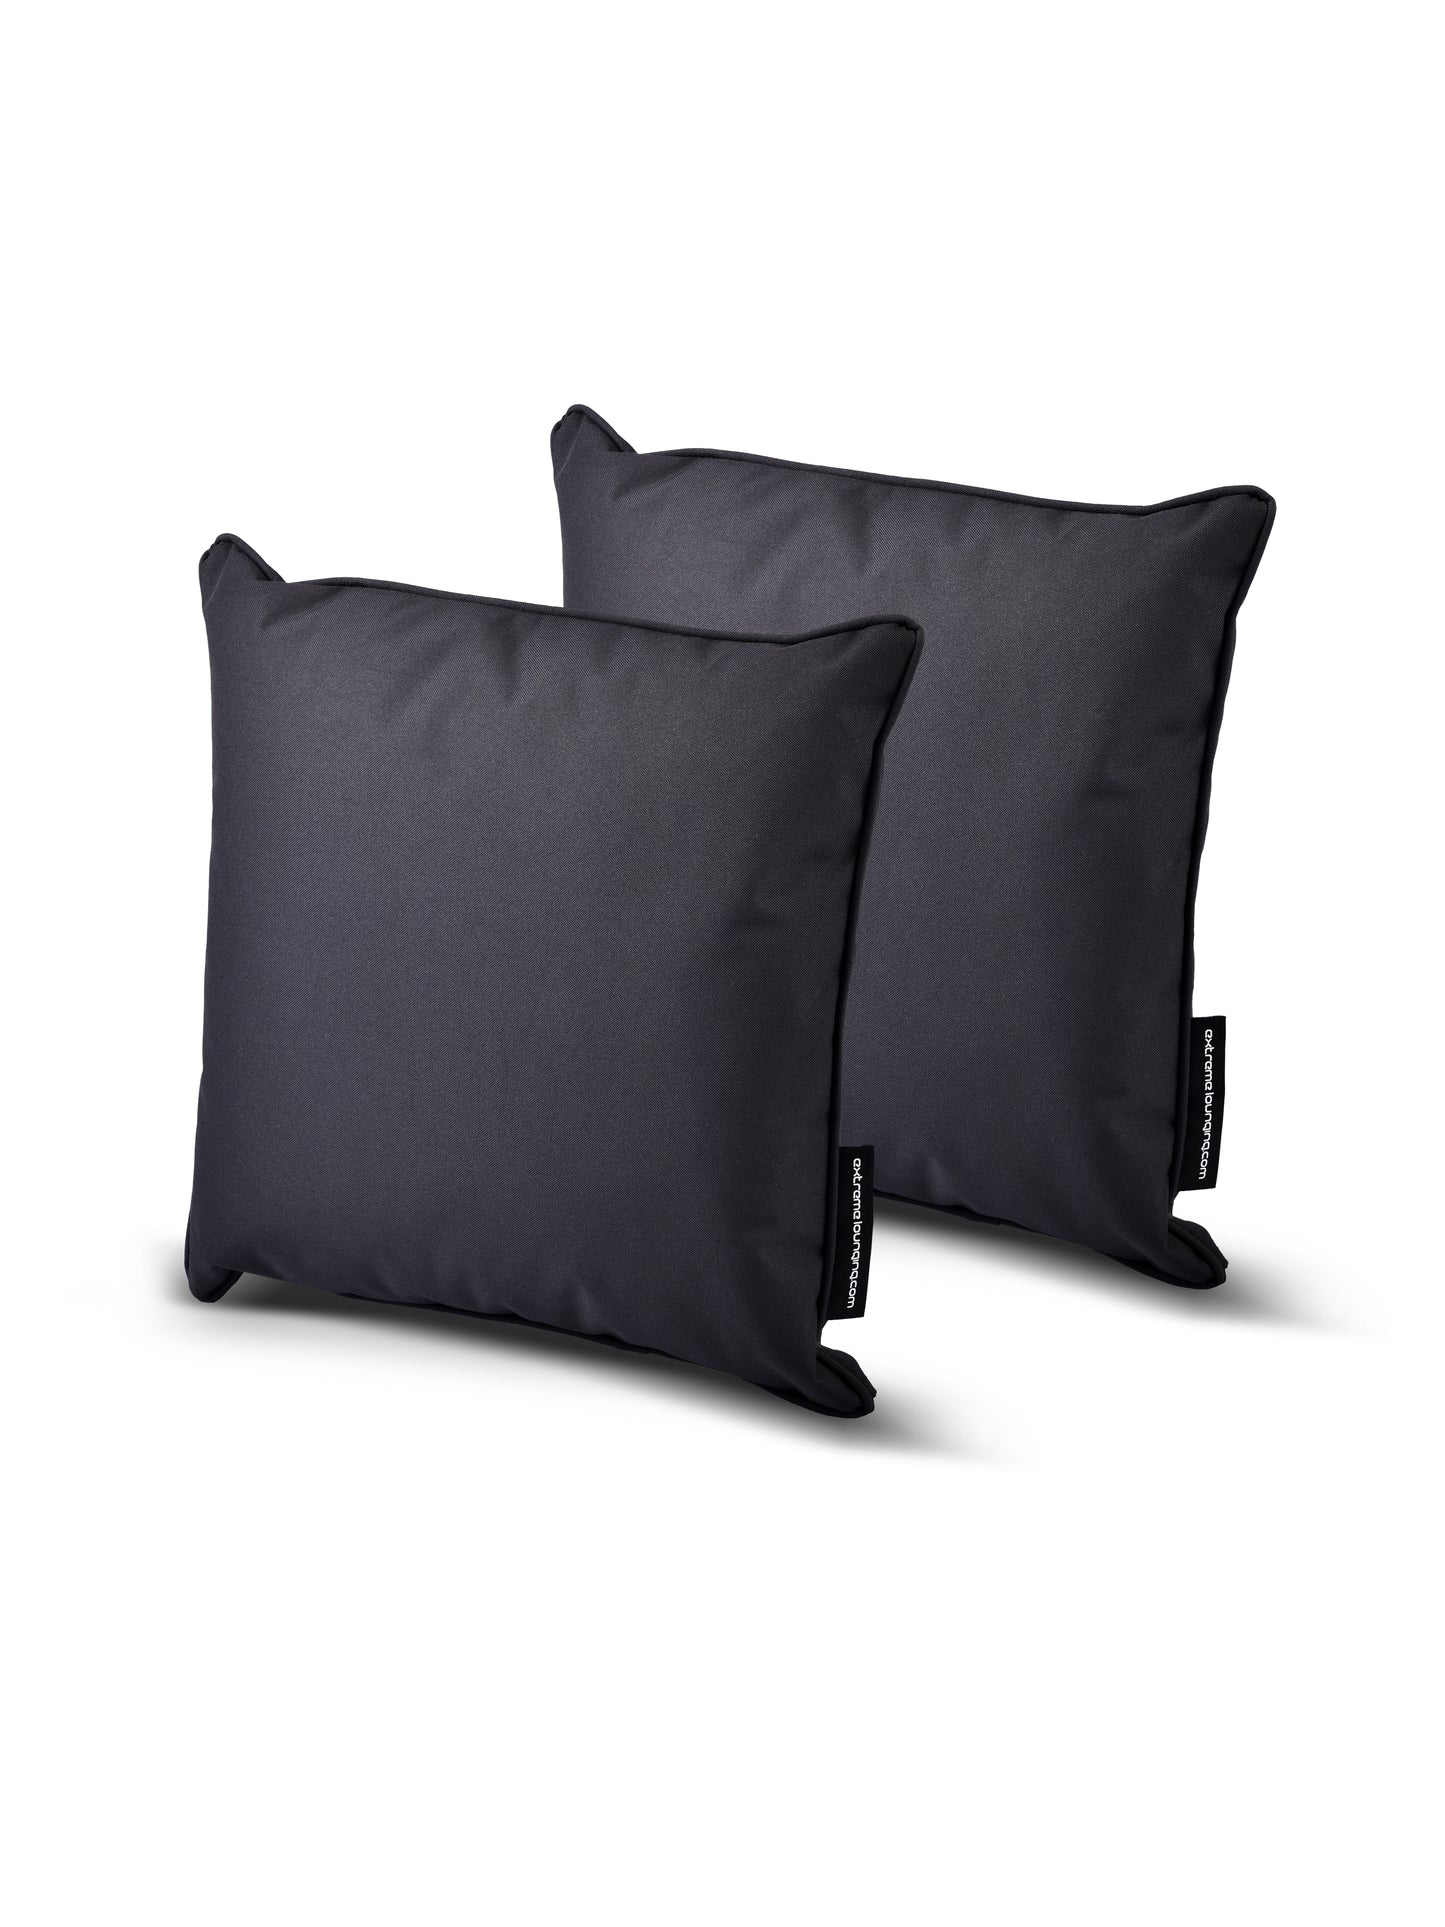 Two black rectangular pillows, crafted from breathable polyester, are positioned side by side against a white background. They have a smooth texture with small tags on the sides displaying a brand name. The lighting highlights the sleek and elegant design of these splash-proof cushions from the B Cushion Twin Pack Brights Collection by Brisks.